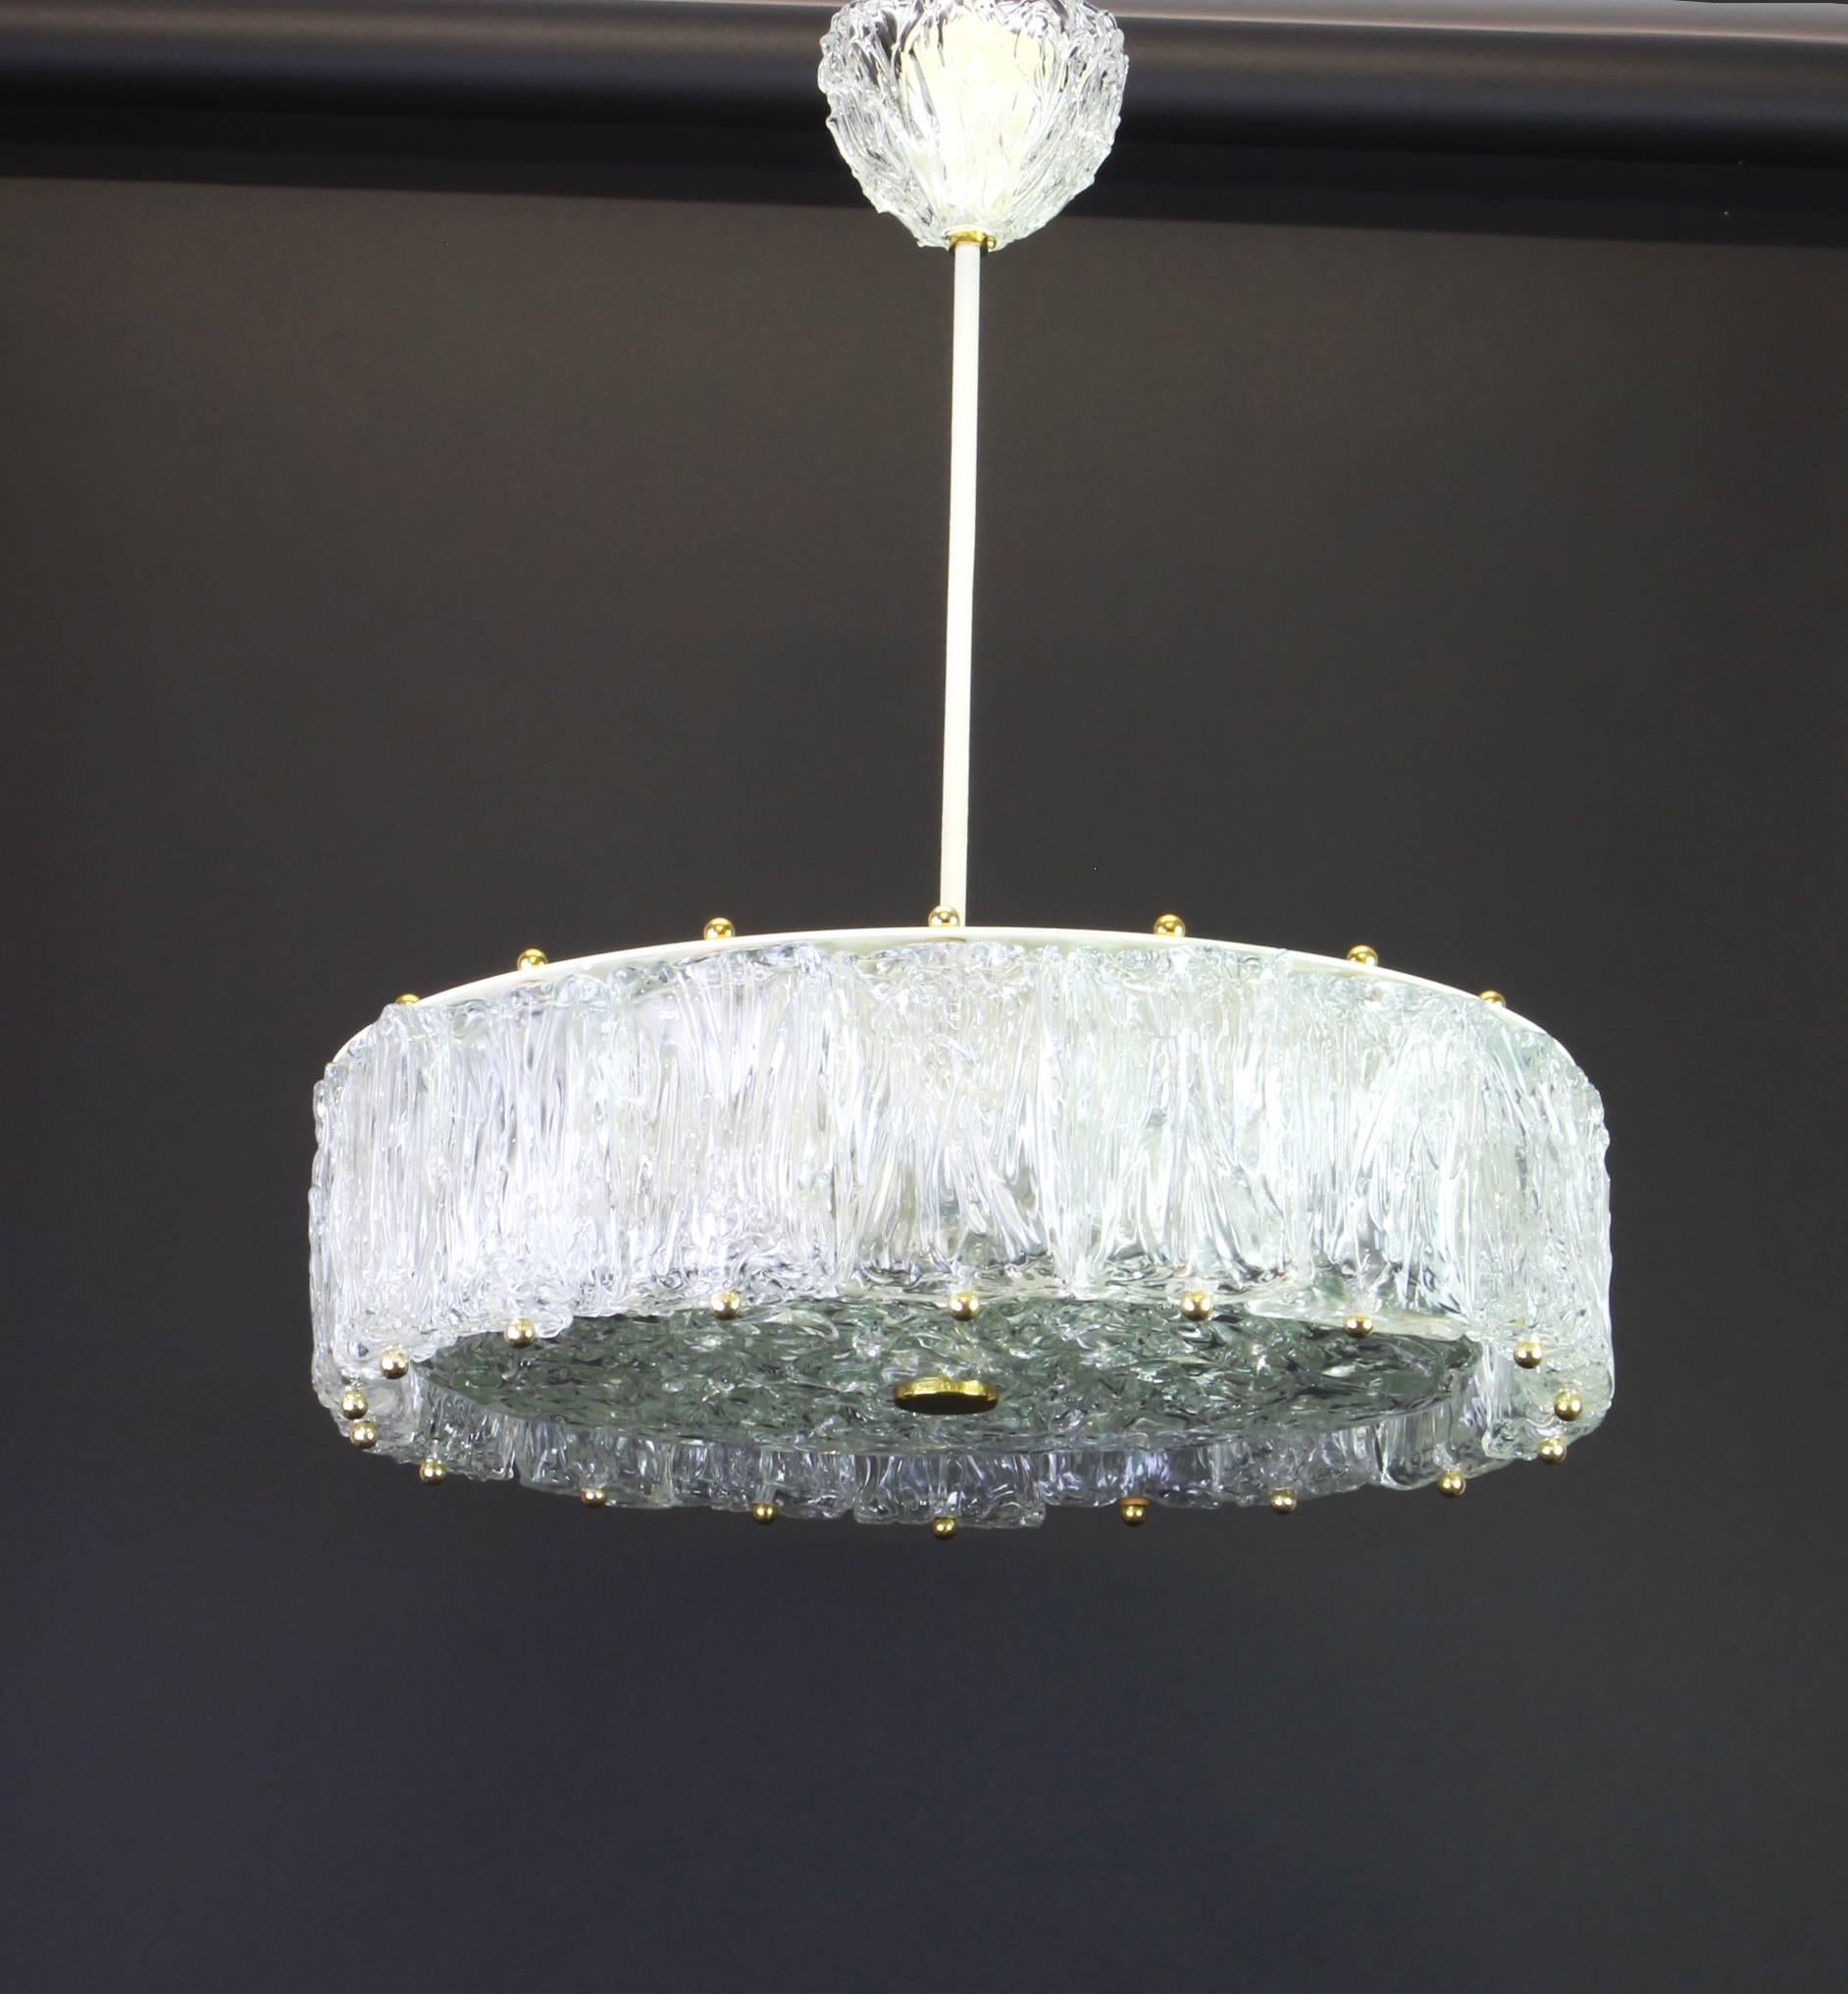 Midcentury Murano glass chandelier by Barovier & Toso, Italy, 1960s
Very good condition.

High quality and in very good condition. Cleaned, well-wired and ready to use.

The fixture requires 12 x E14 standard bulbs with 40W max each and